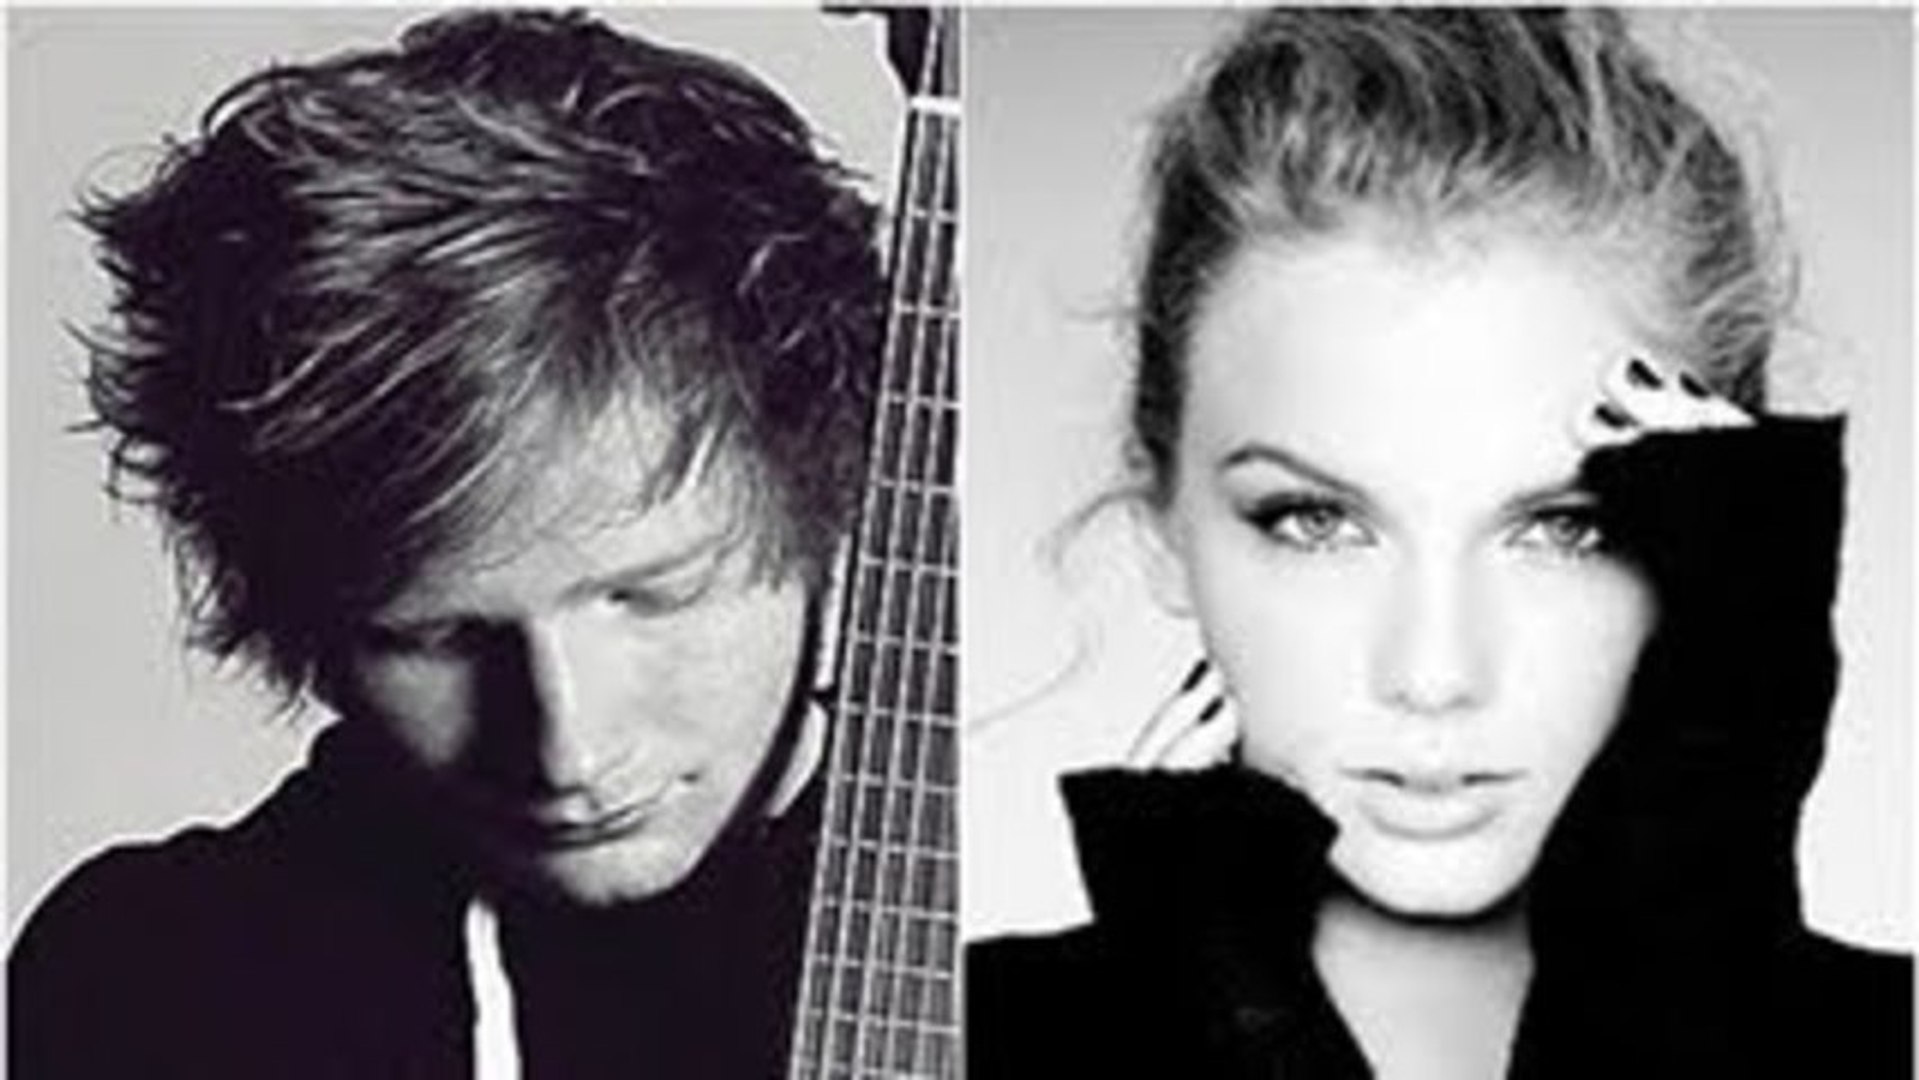 Taylor Swift Everything Has Changed ft. Ed Sheeran - Video (Review)